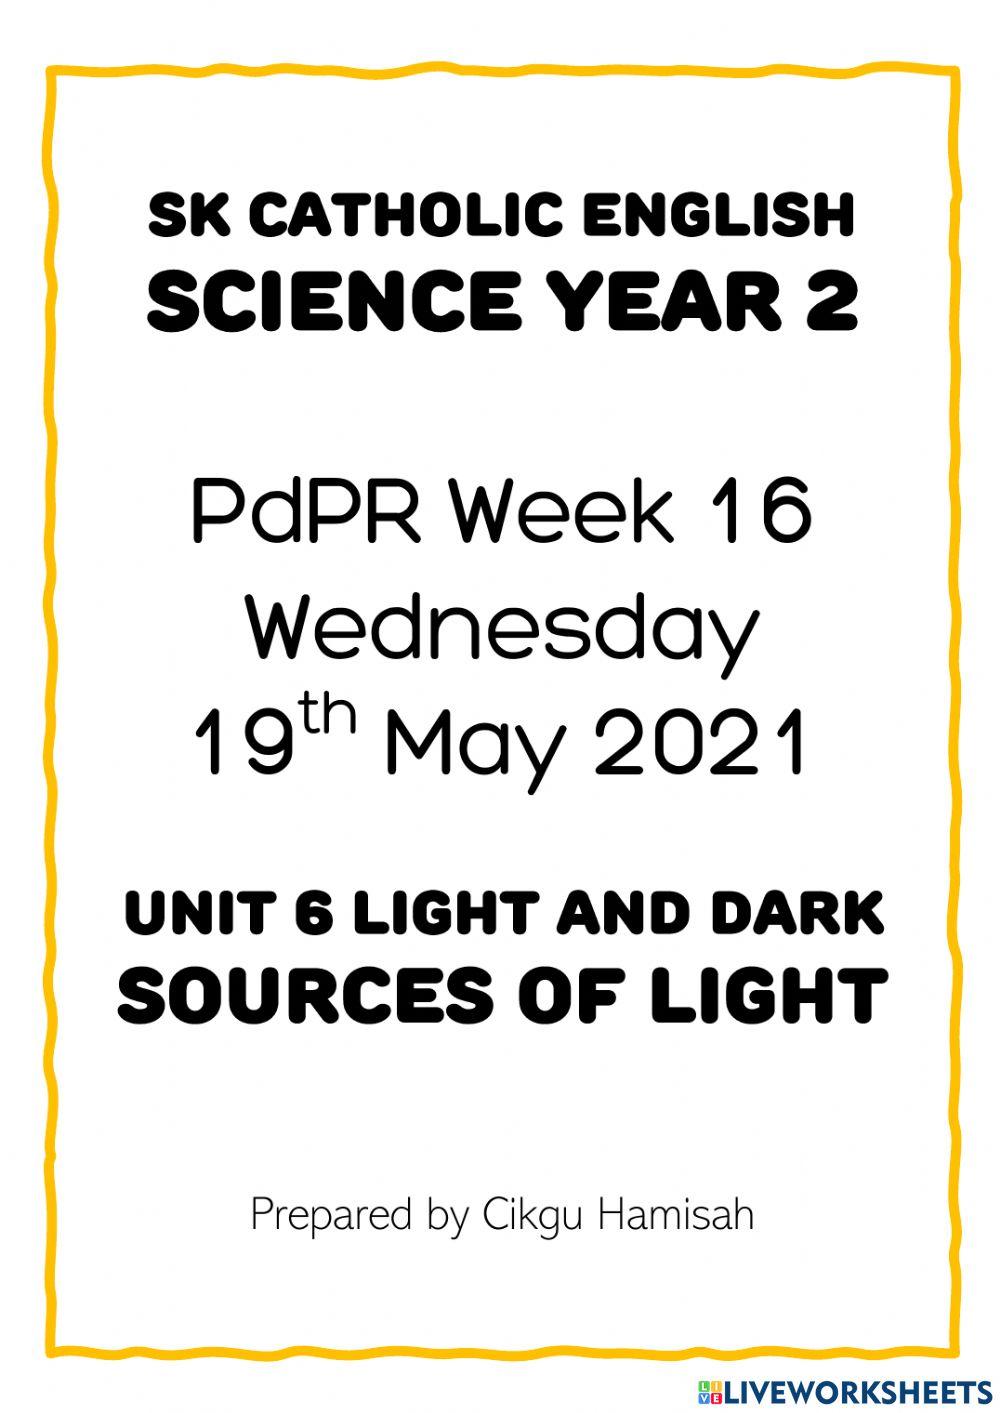 Science Year 2 PdPRW16 Wed 19.05.2021 Unit 6 Light and Dark